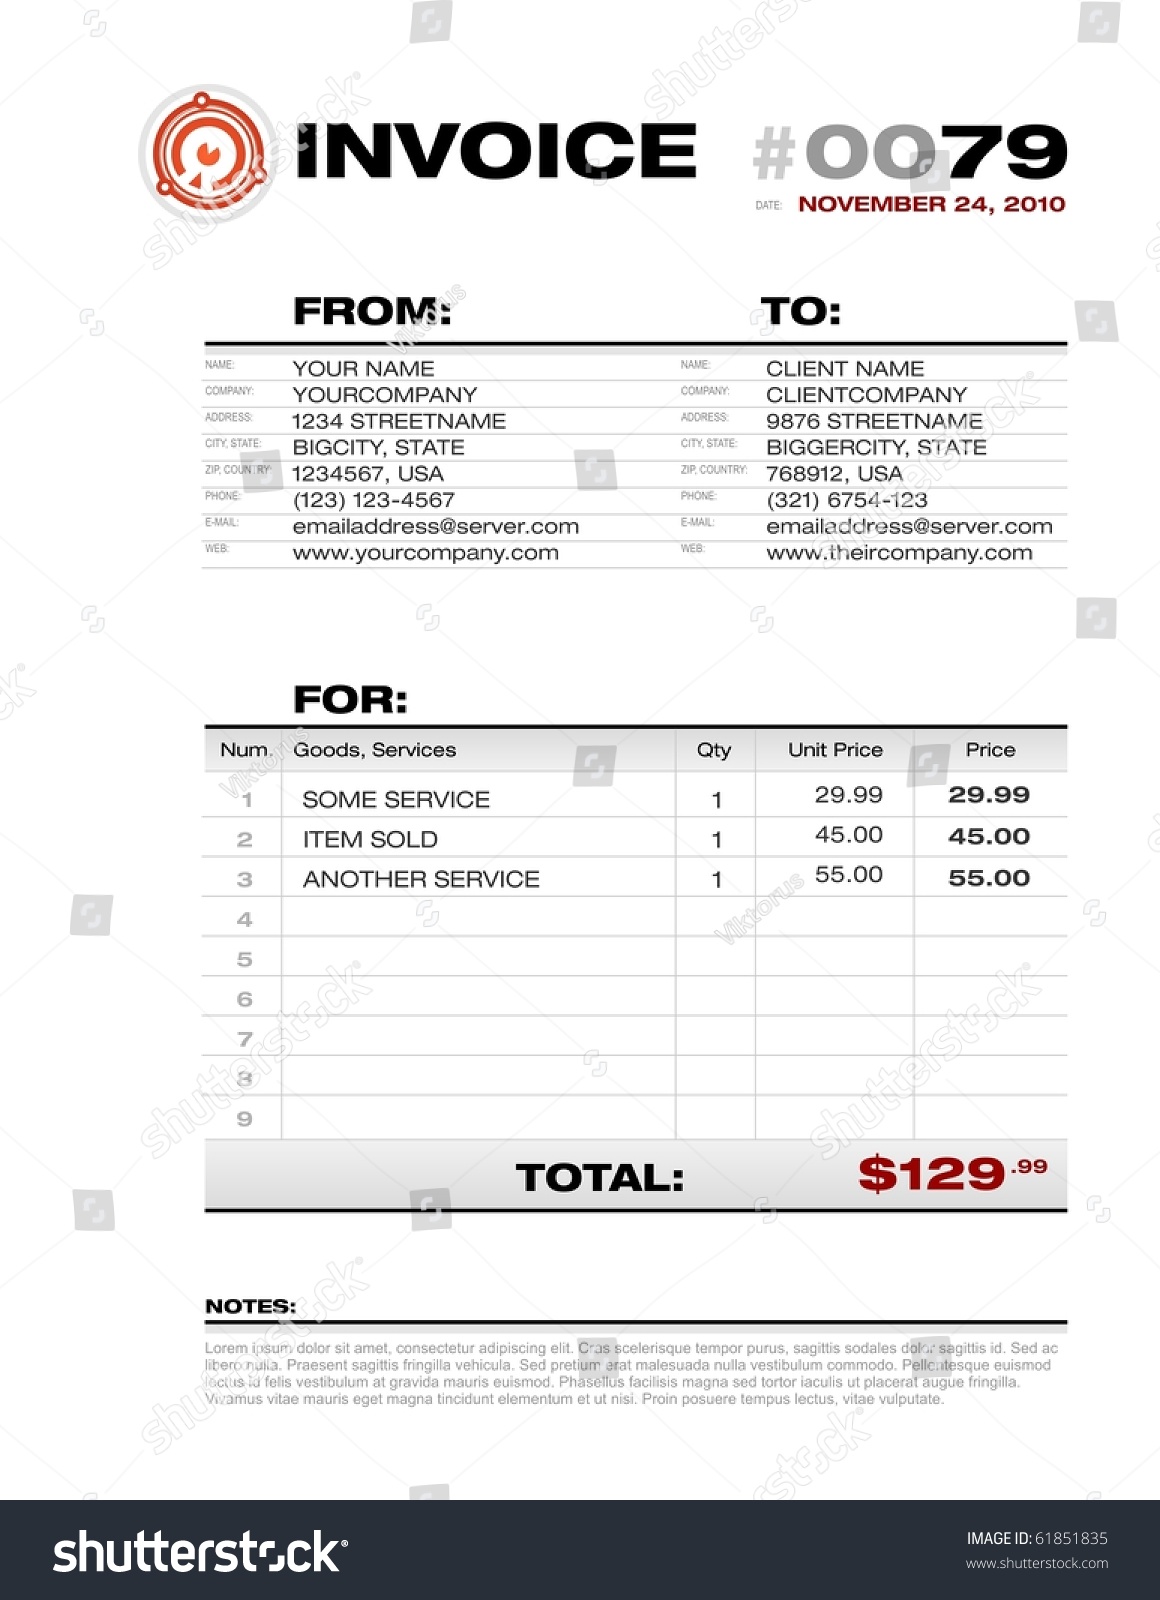 Business Document Invoice Template Stock Vector 61851835 